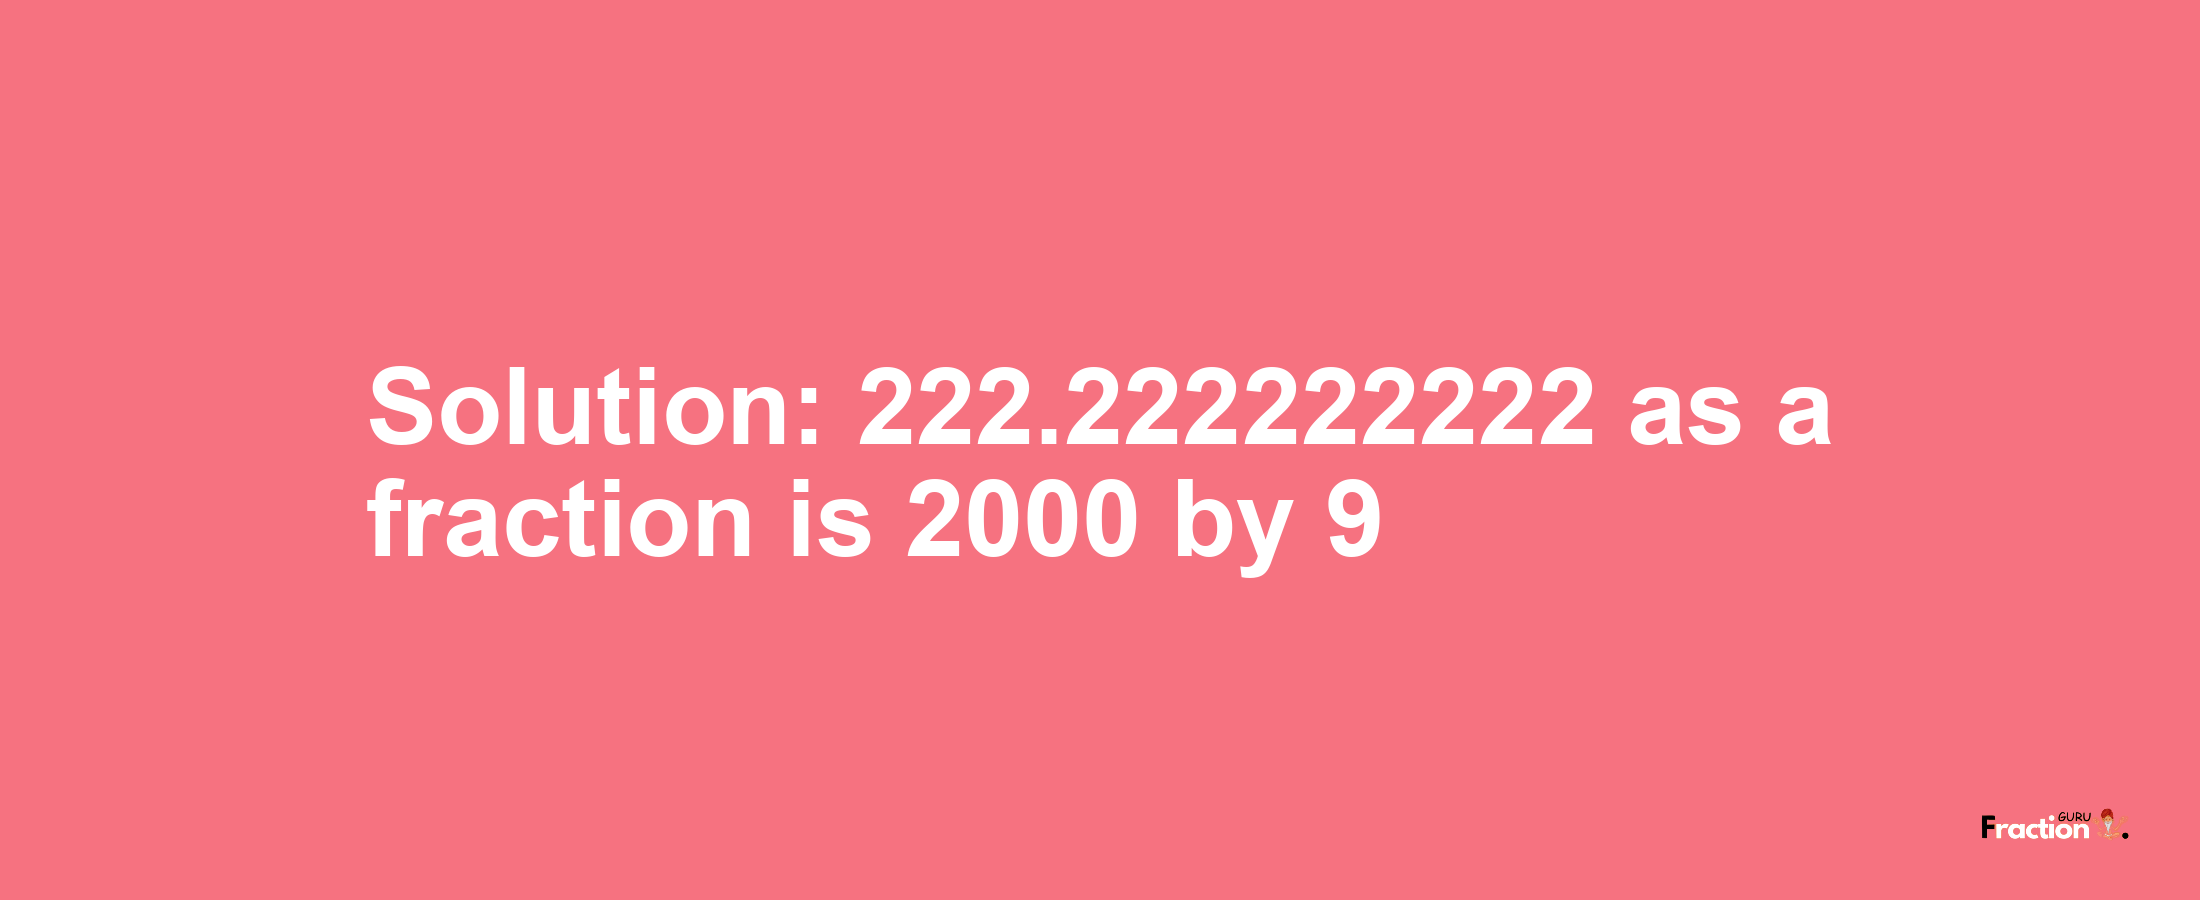 Solution:222.222222222 as a fraction is 2000/9